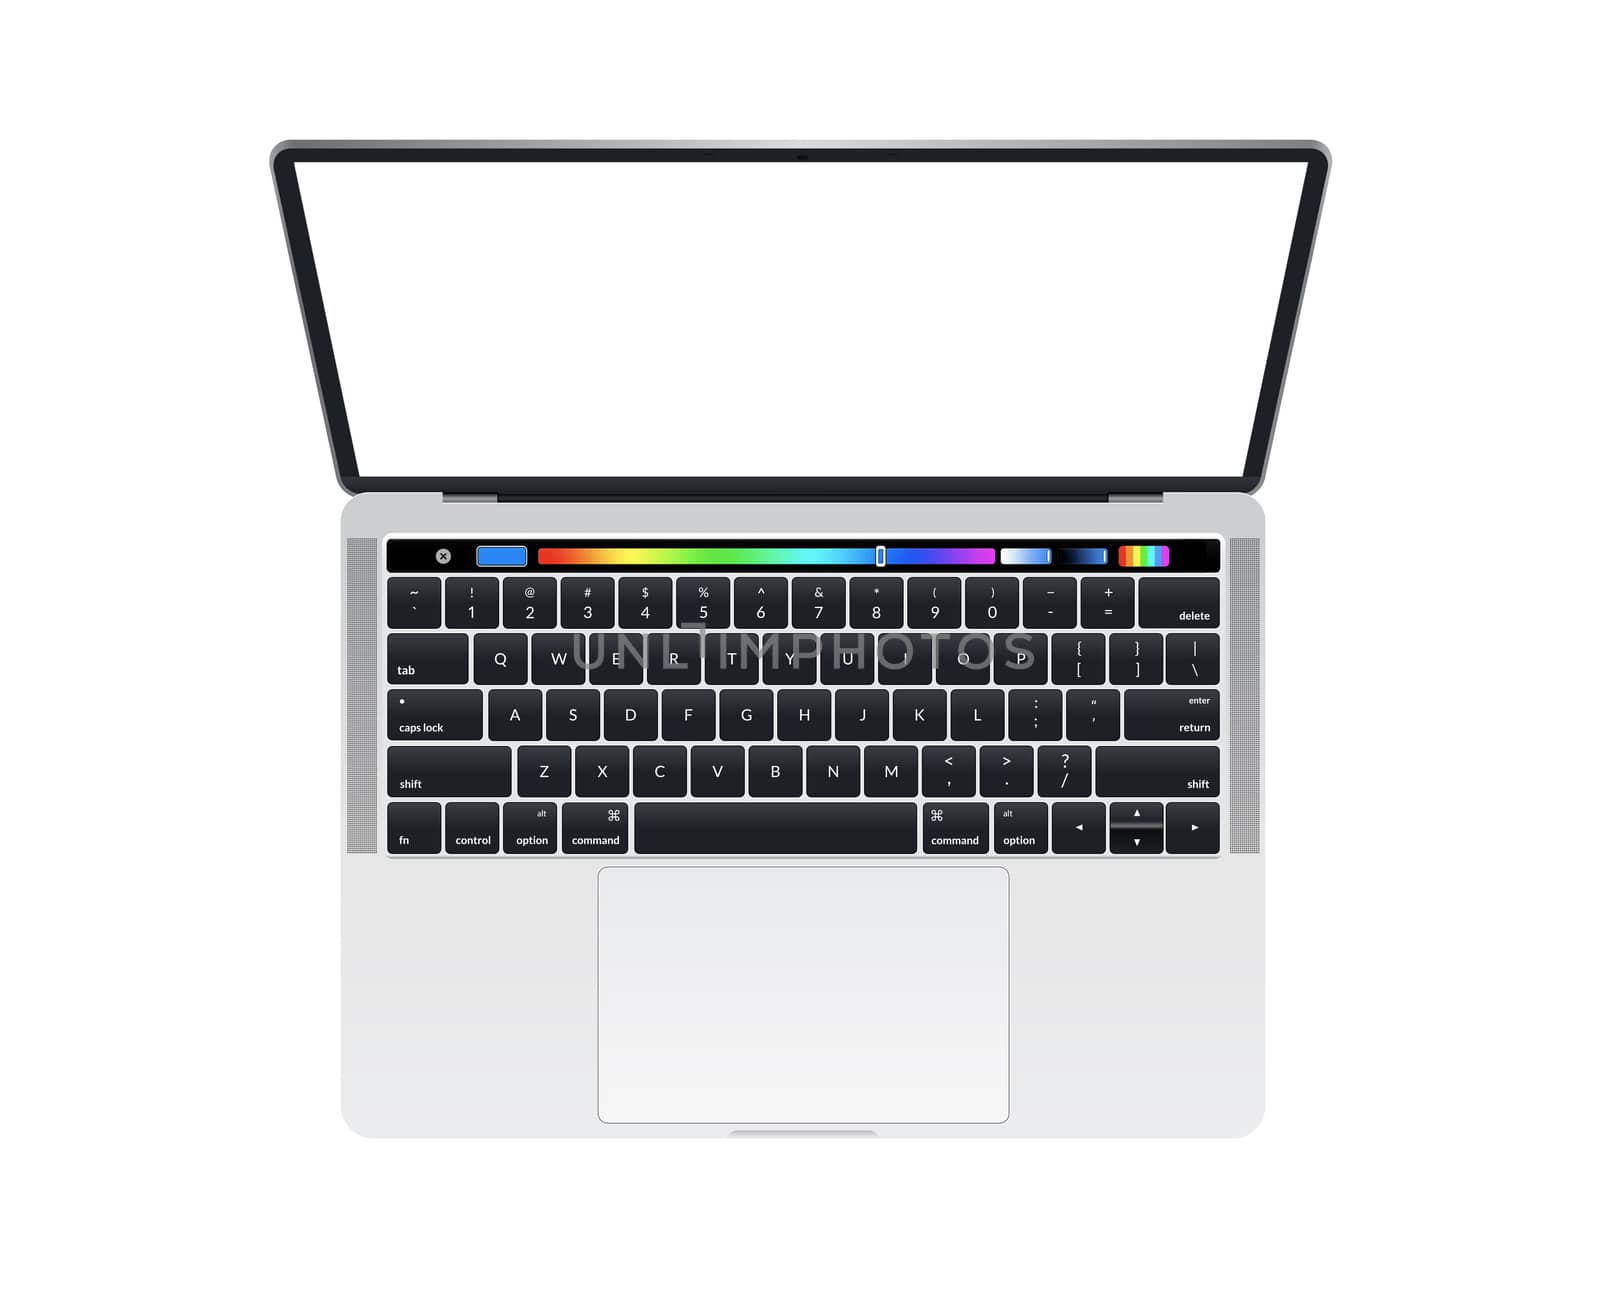 The isolated silver laptop computer with keyboard mockup on white background with touch bar graphic color picker